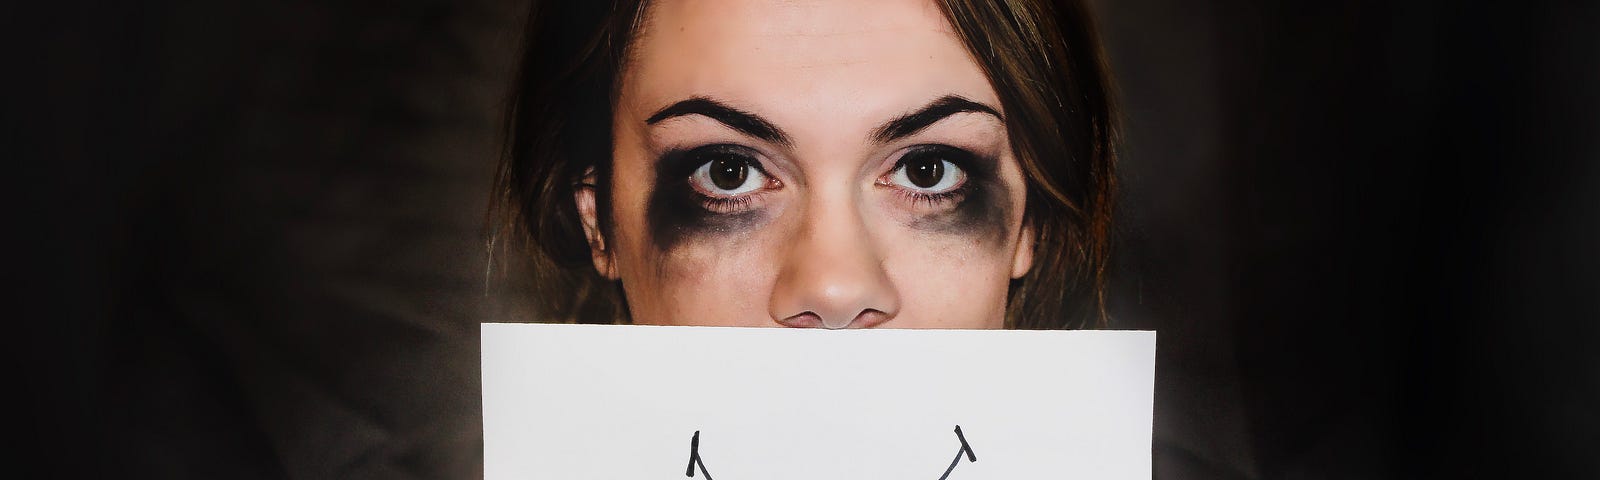 Women with smudged eye makeup holding up a piece of card with a smile on it.